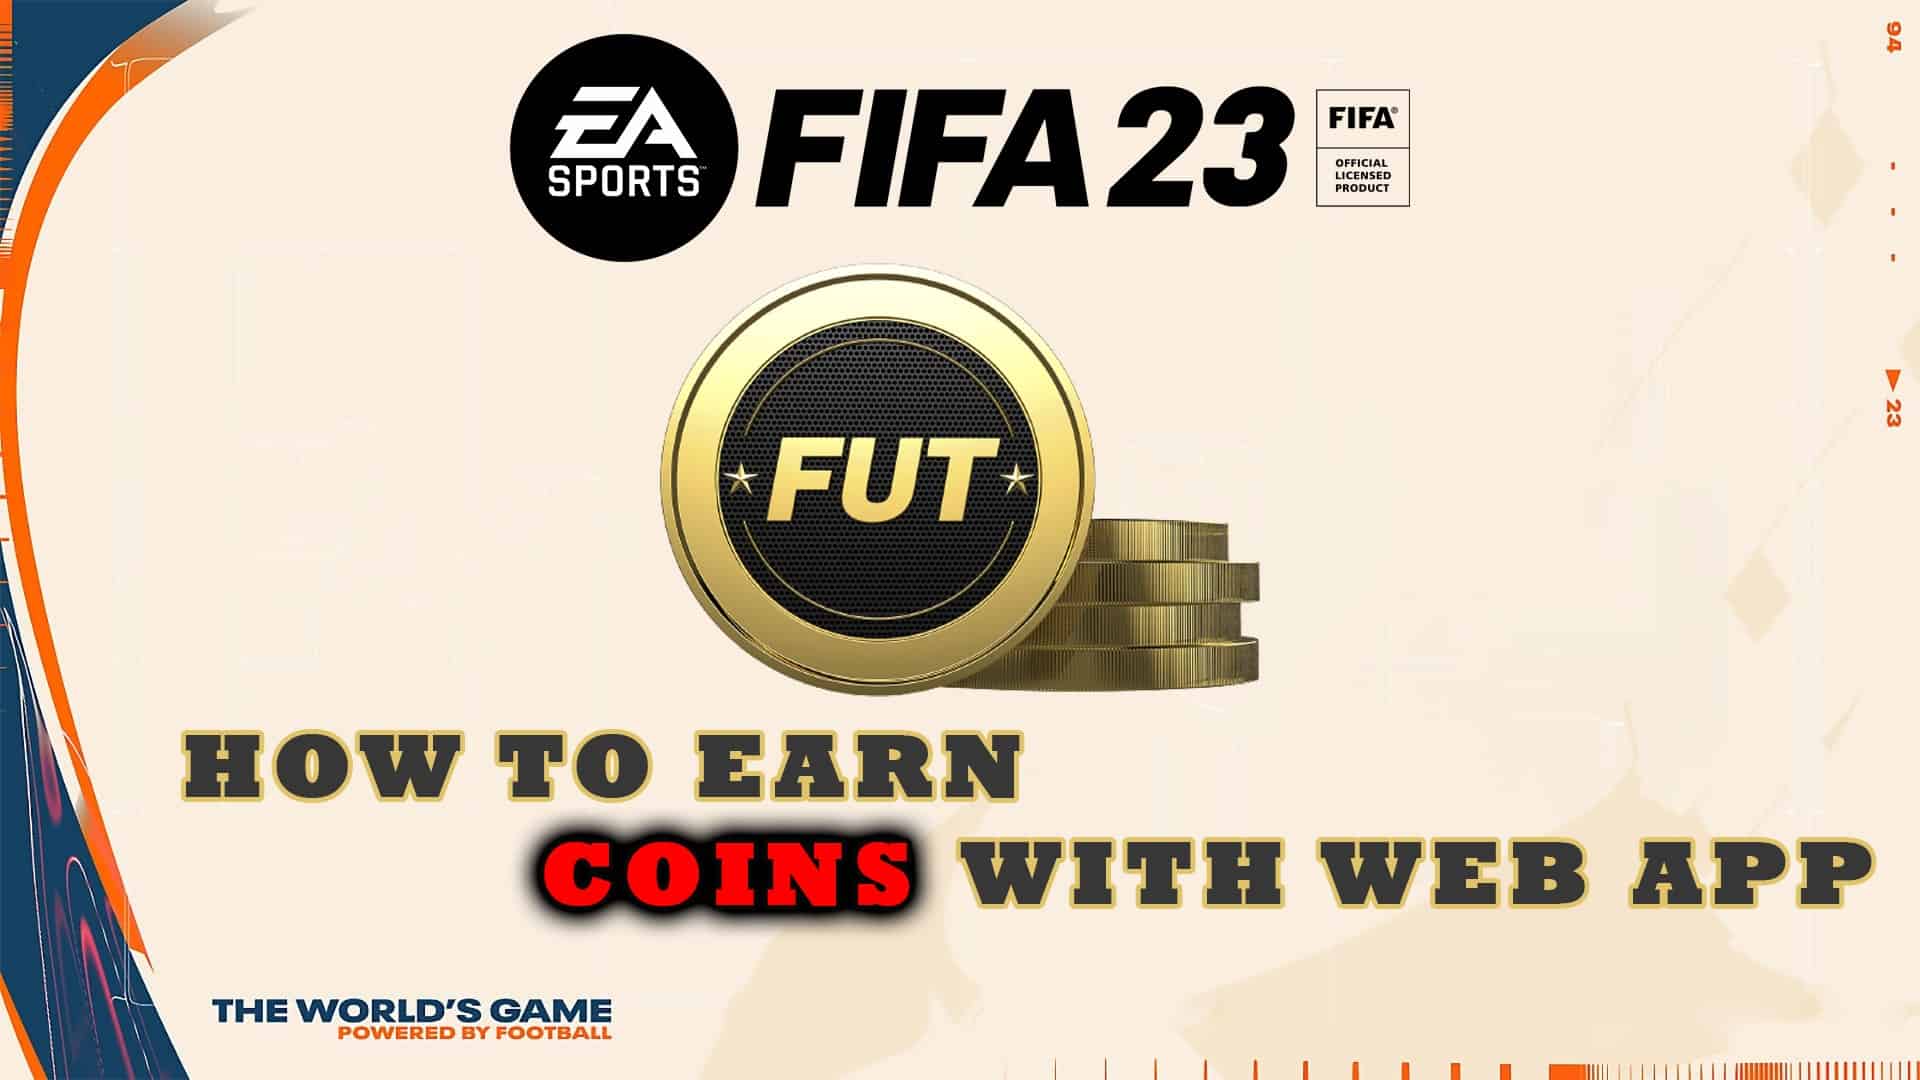 Be safe with FUT Coins and FIFA Points